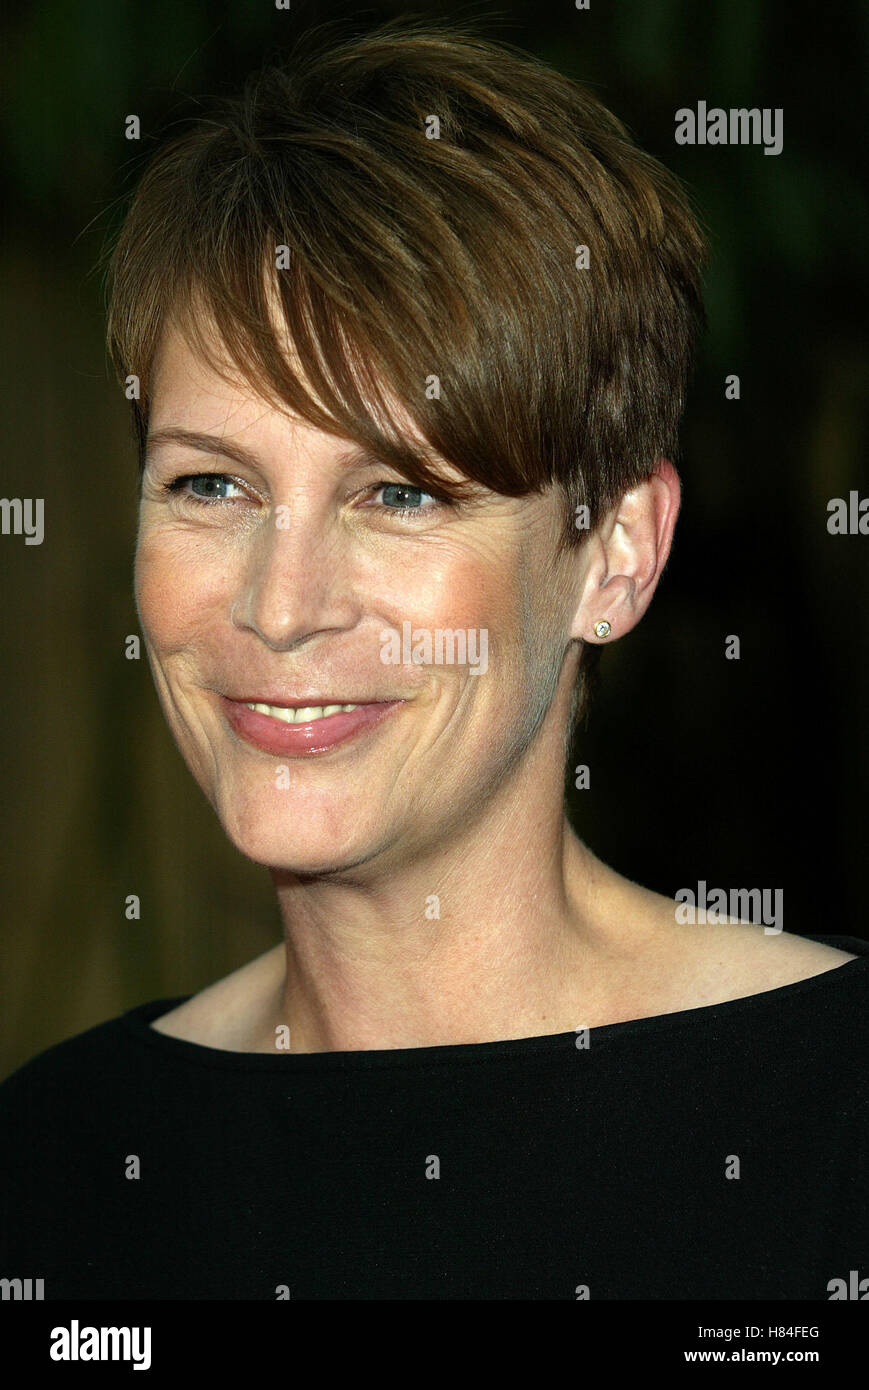 JAMIE LEE CURTIS CQ FILM PREMIERE EGYPTIAN THEATRE HOLLYWOOD LOS ANGELES  USA 13 May 2002 Stock Photo - Alamy